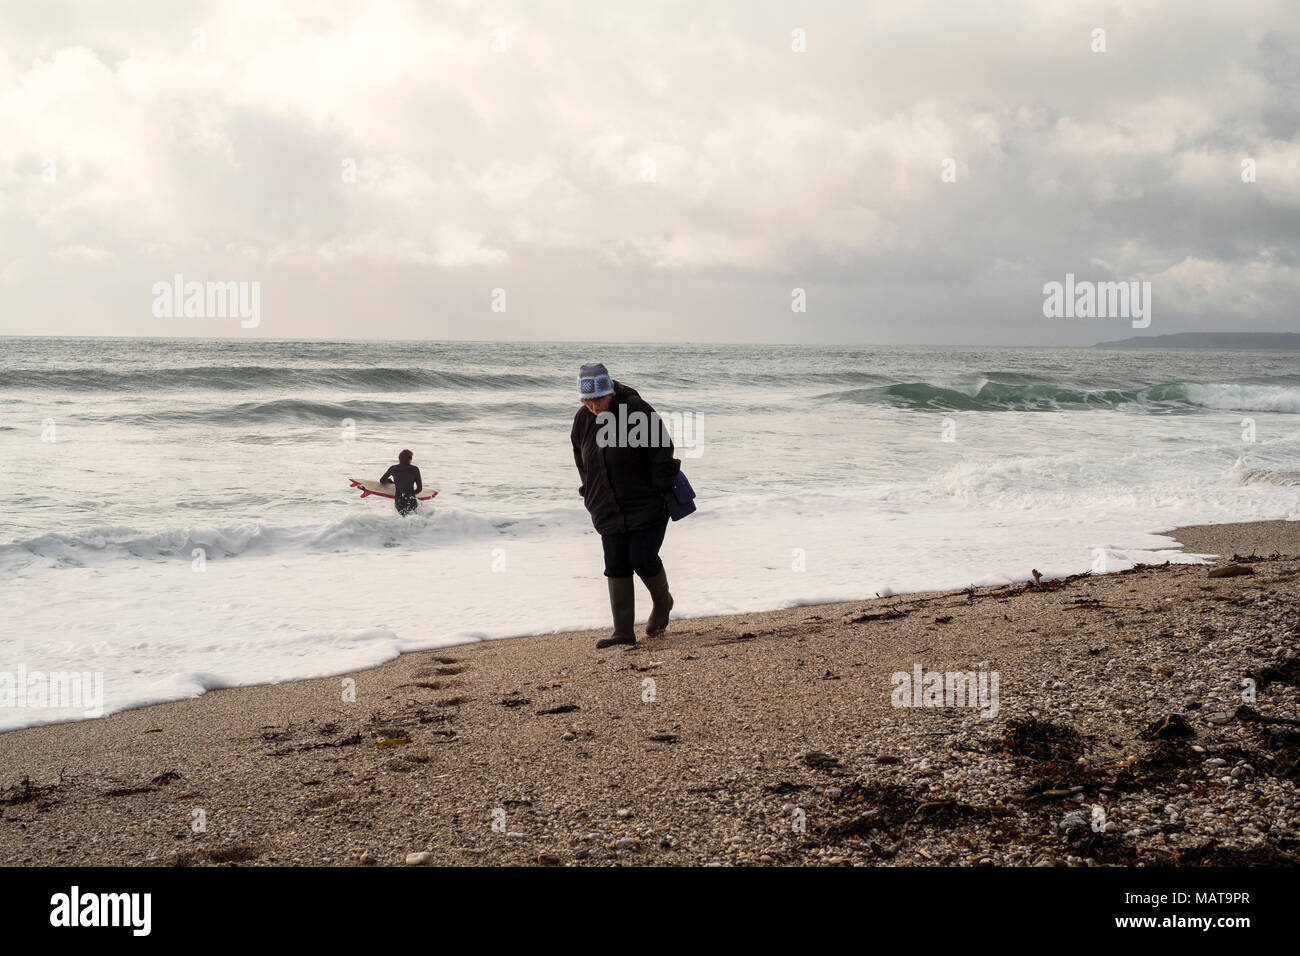 Gyllyngvase beach, Falmouth. 4th Apr, 2018. UK Weather: Surfer braves cold water  at Gyllyngvase beach, Falmouth. A woman walks along Falmouth's Gyllyngvase beach as a surfer enters the water Credit: Mick Buston/Alamy Live News Stock Photo